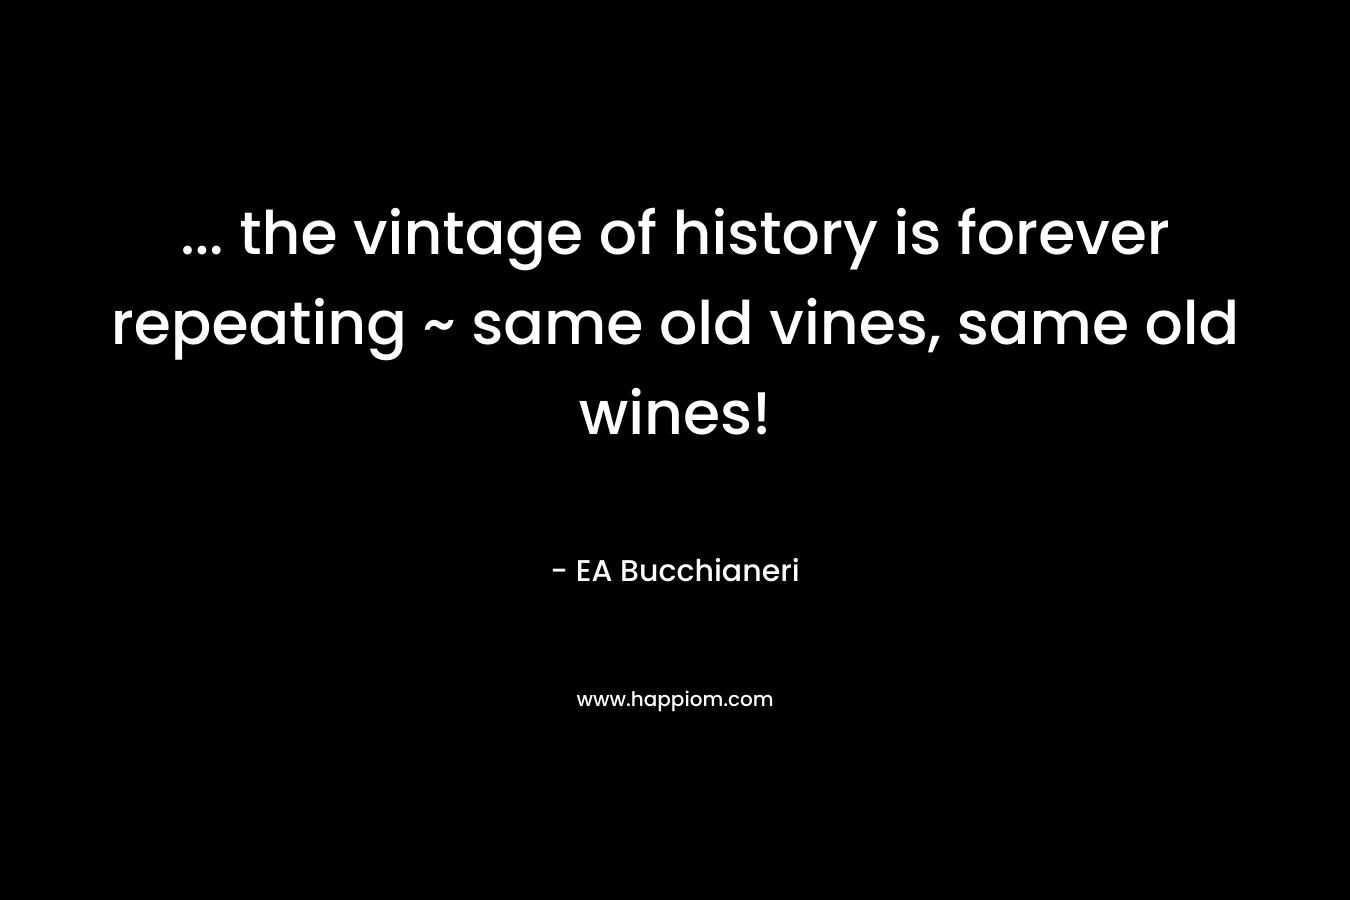 ... the vintage of history is forever repeating ~ same old vines, same old wines!